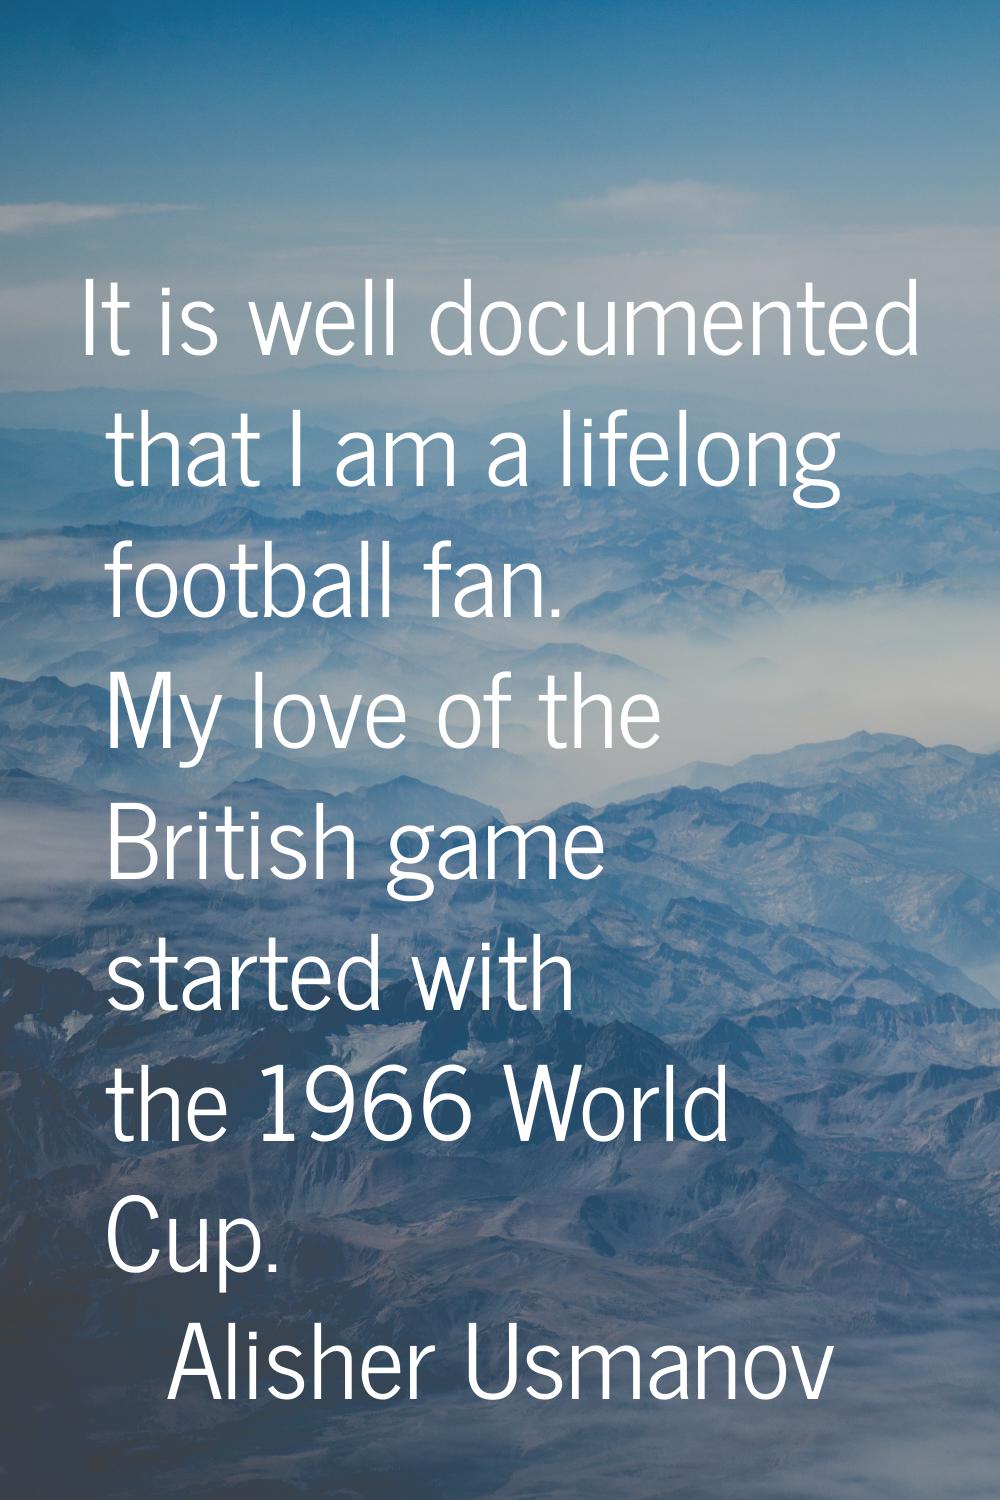 It is well documented that I am a lifelong football fan. My love of the British game started with t